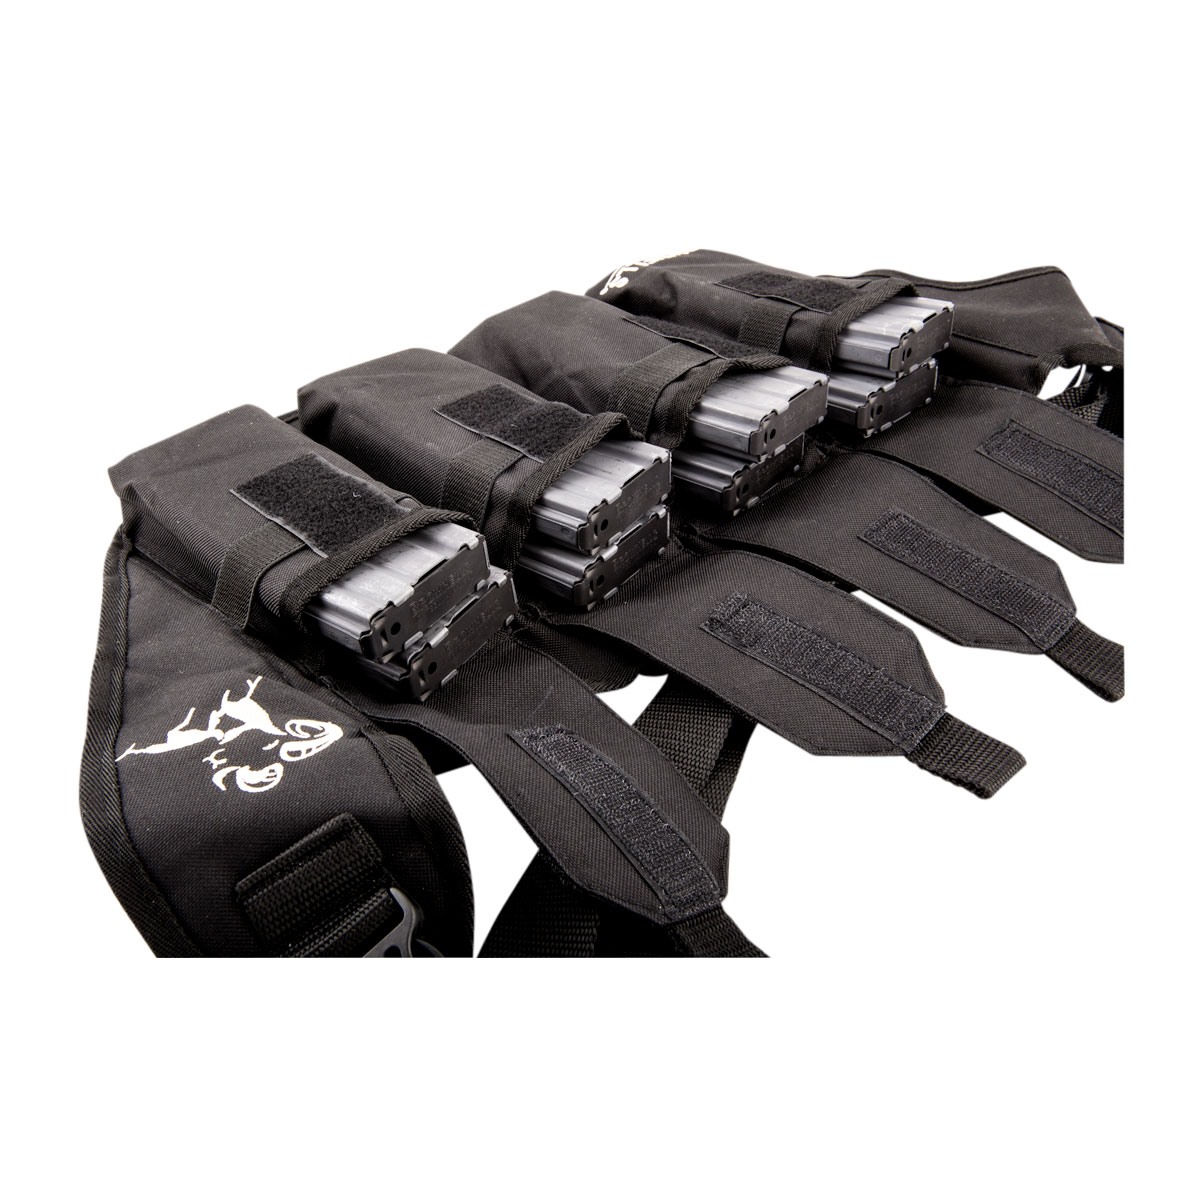 AR-15 Magazine Holder Belt: Essential Gear for Tactical Shooters - News ...